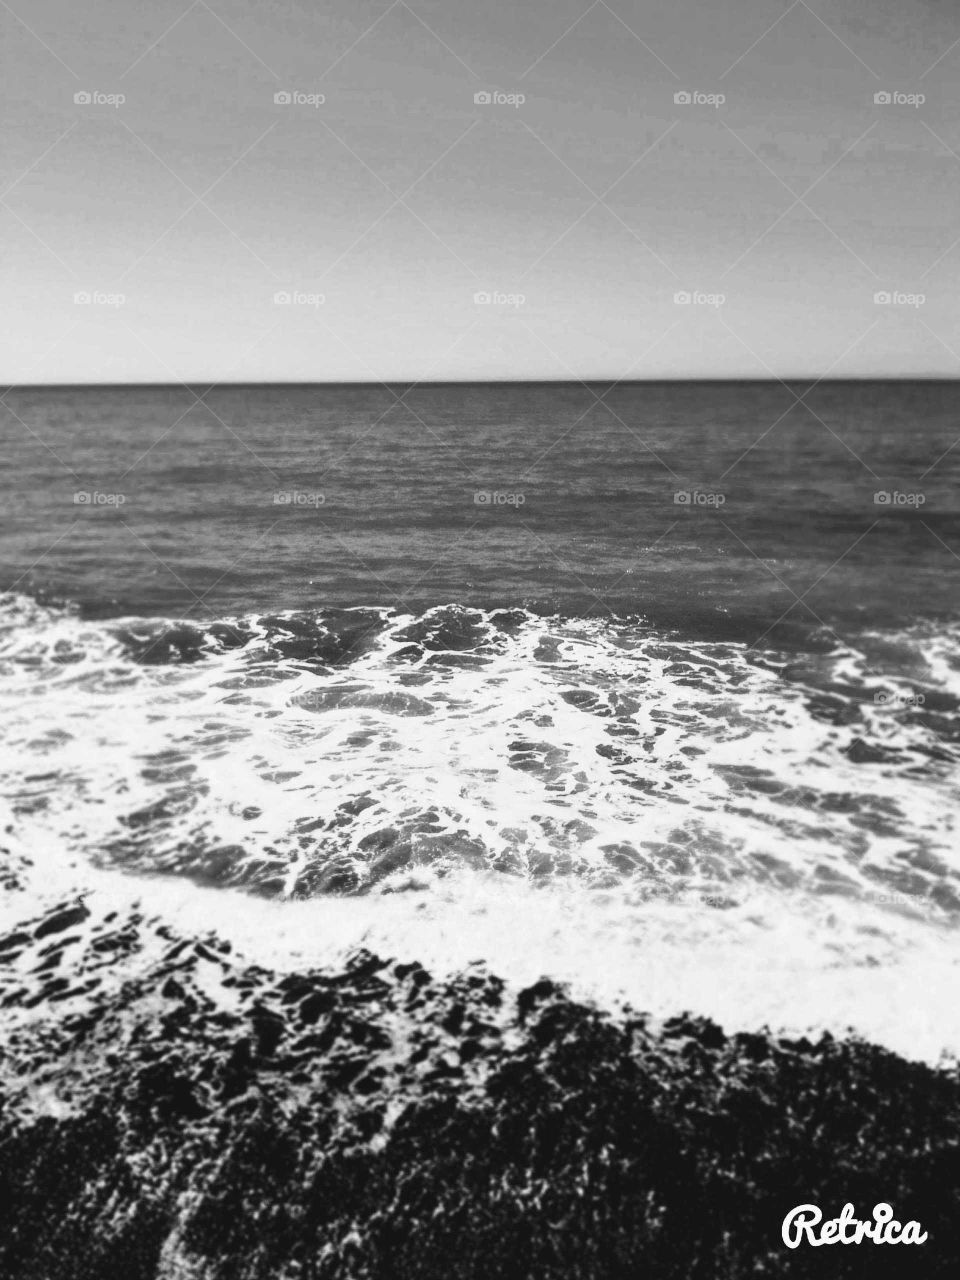 Black and white beach scene small waves on a calm summers day.